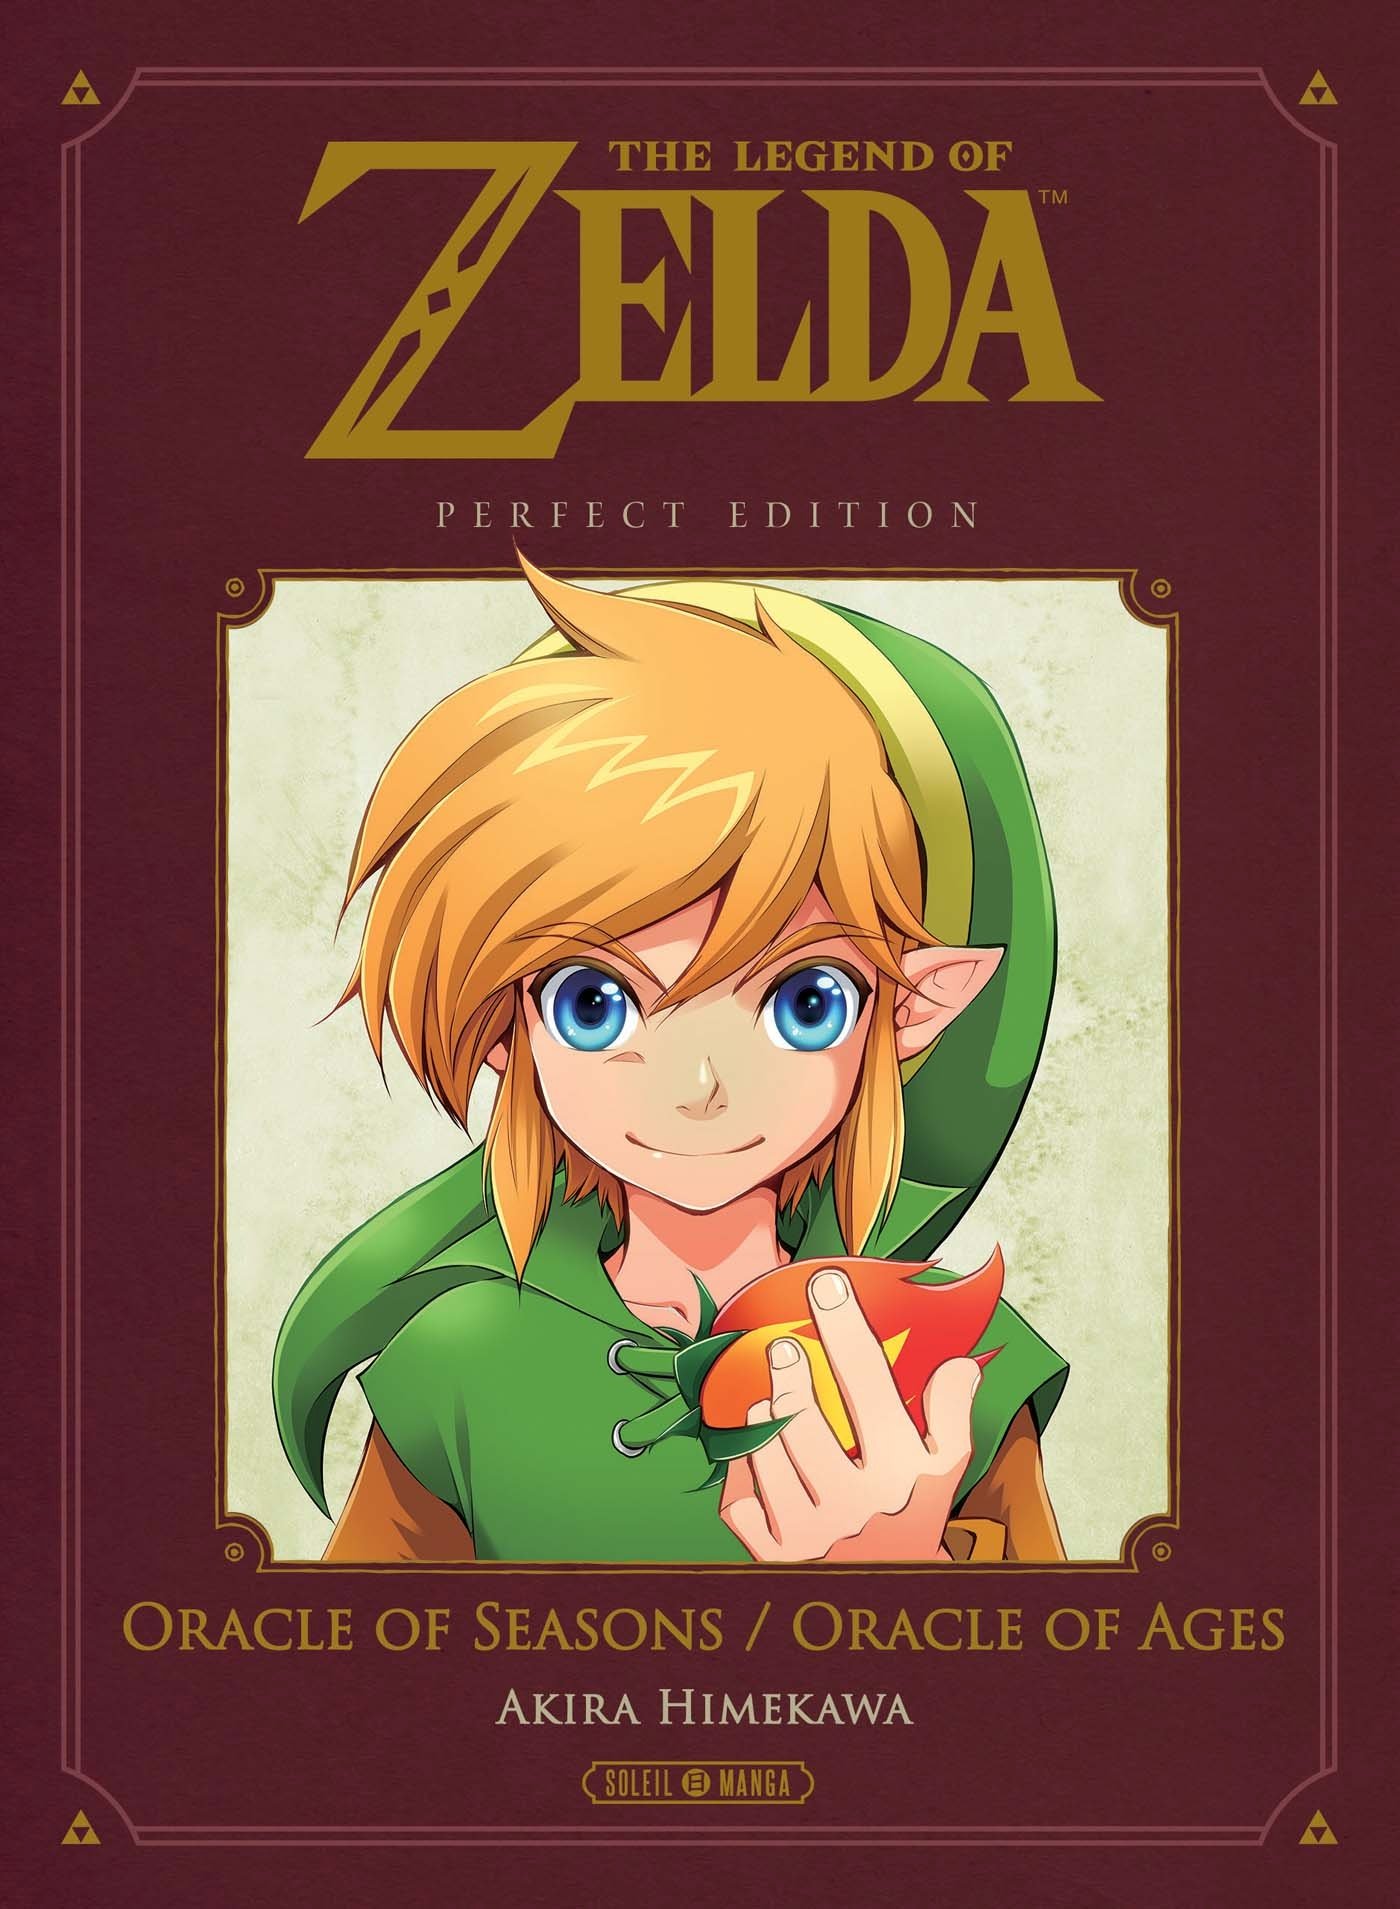 The Legend of Zelda - Perfect Edition - Oracles of seasons